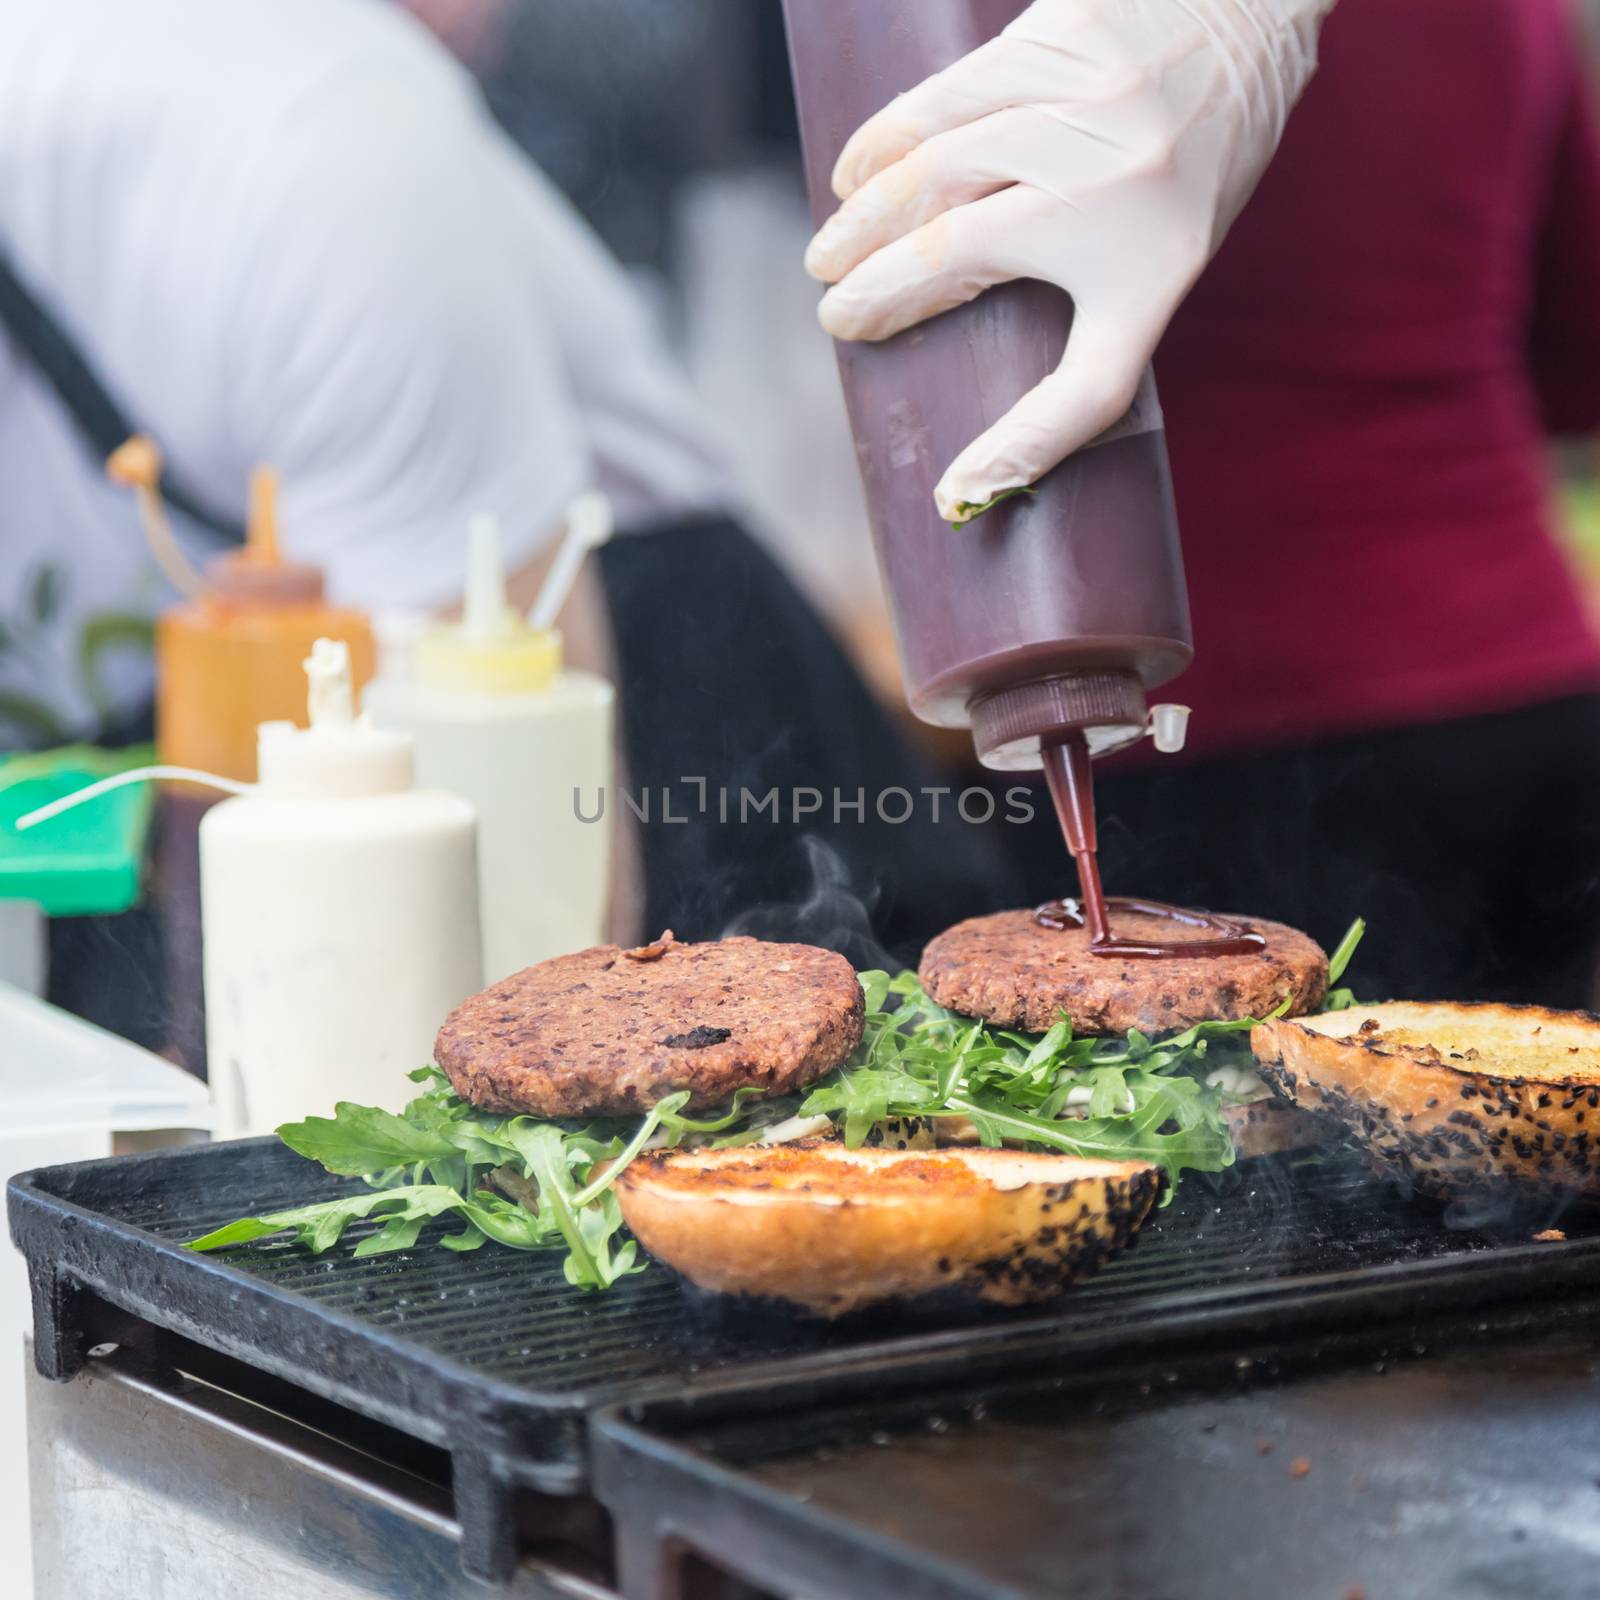 Chef making beef burgers outdoor on open kitchen international food festival event. Street food ready to serve on a food stall.